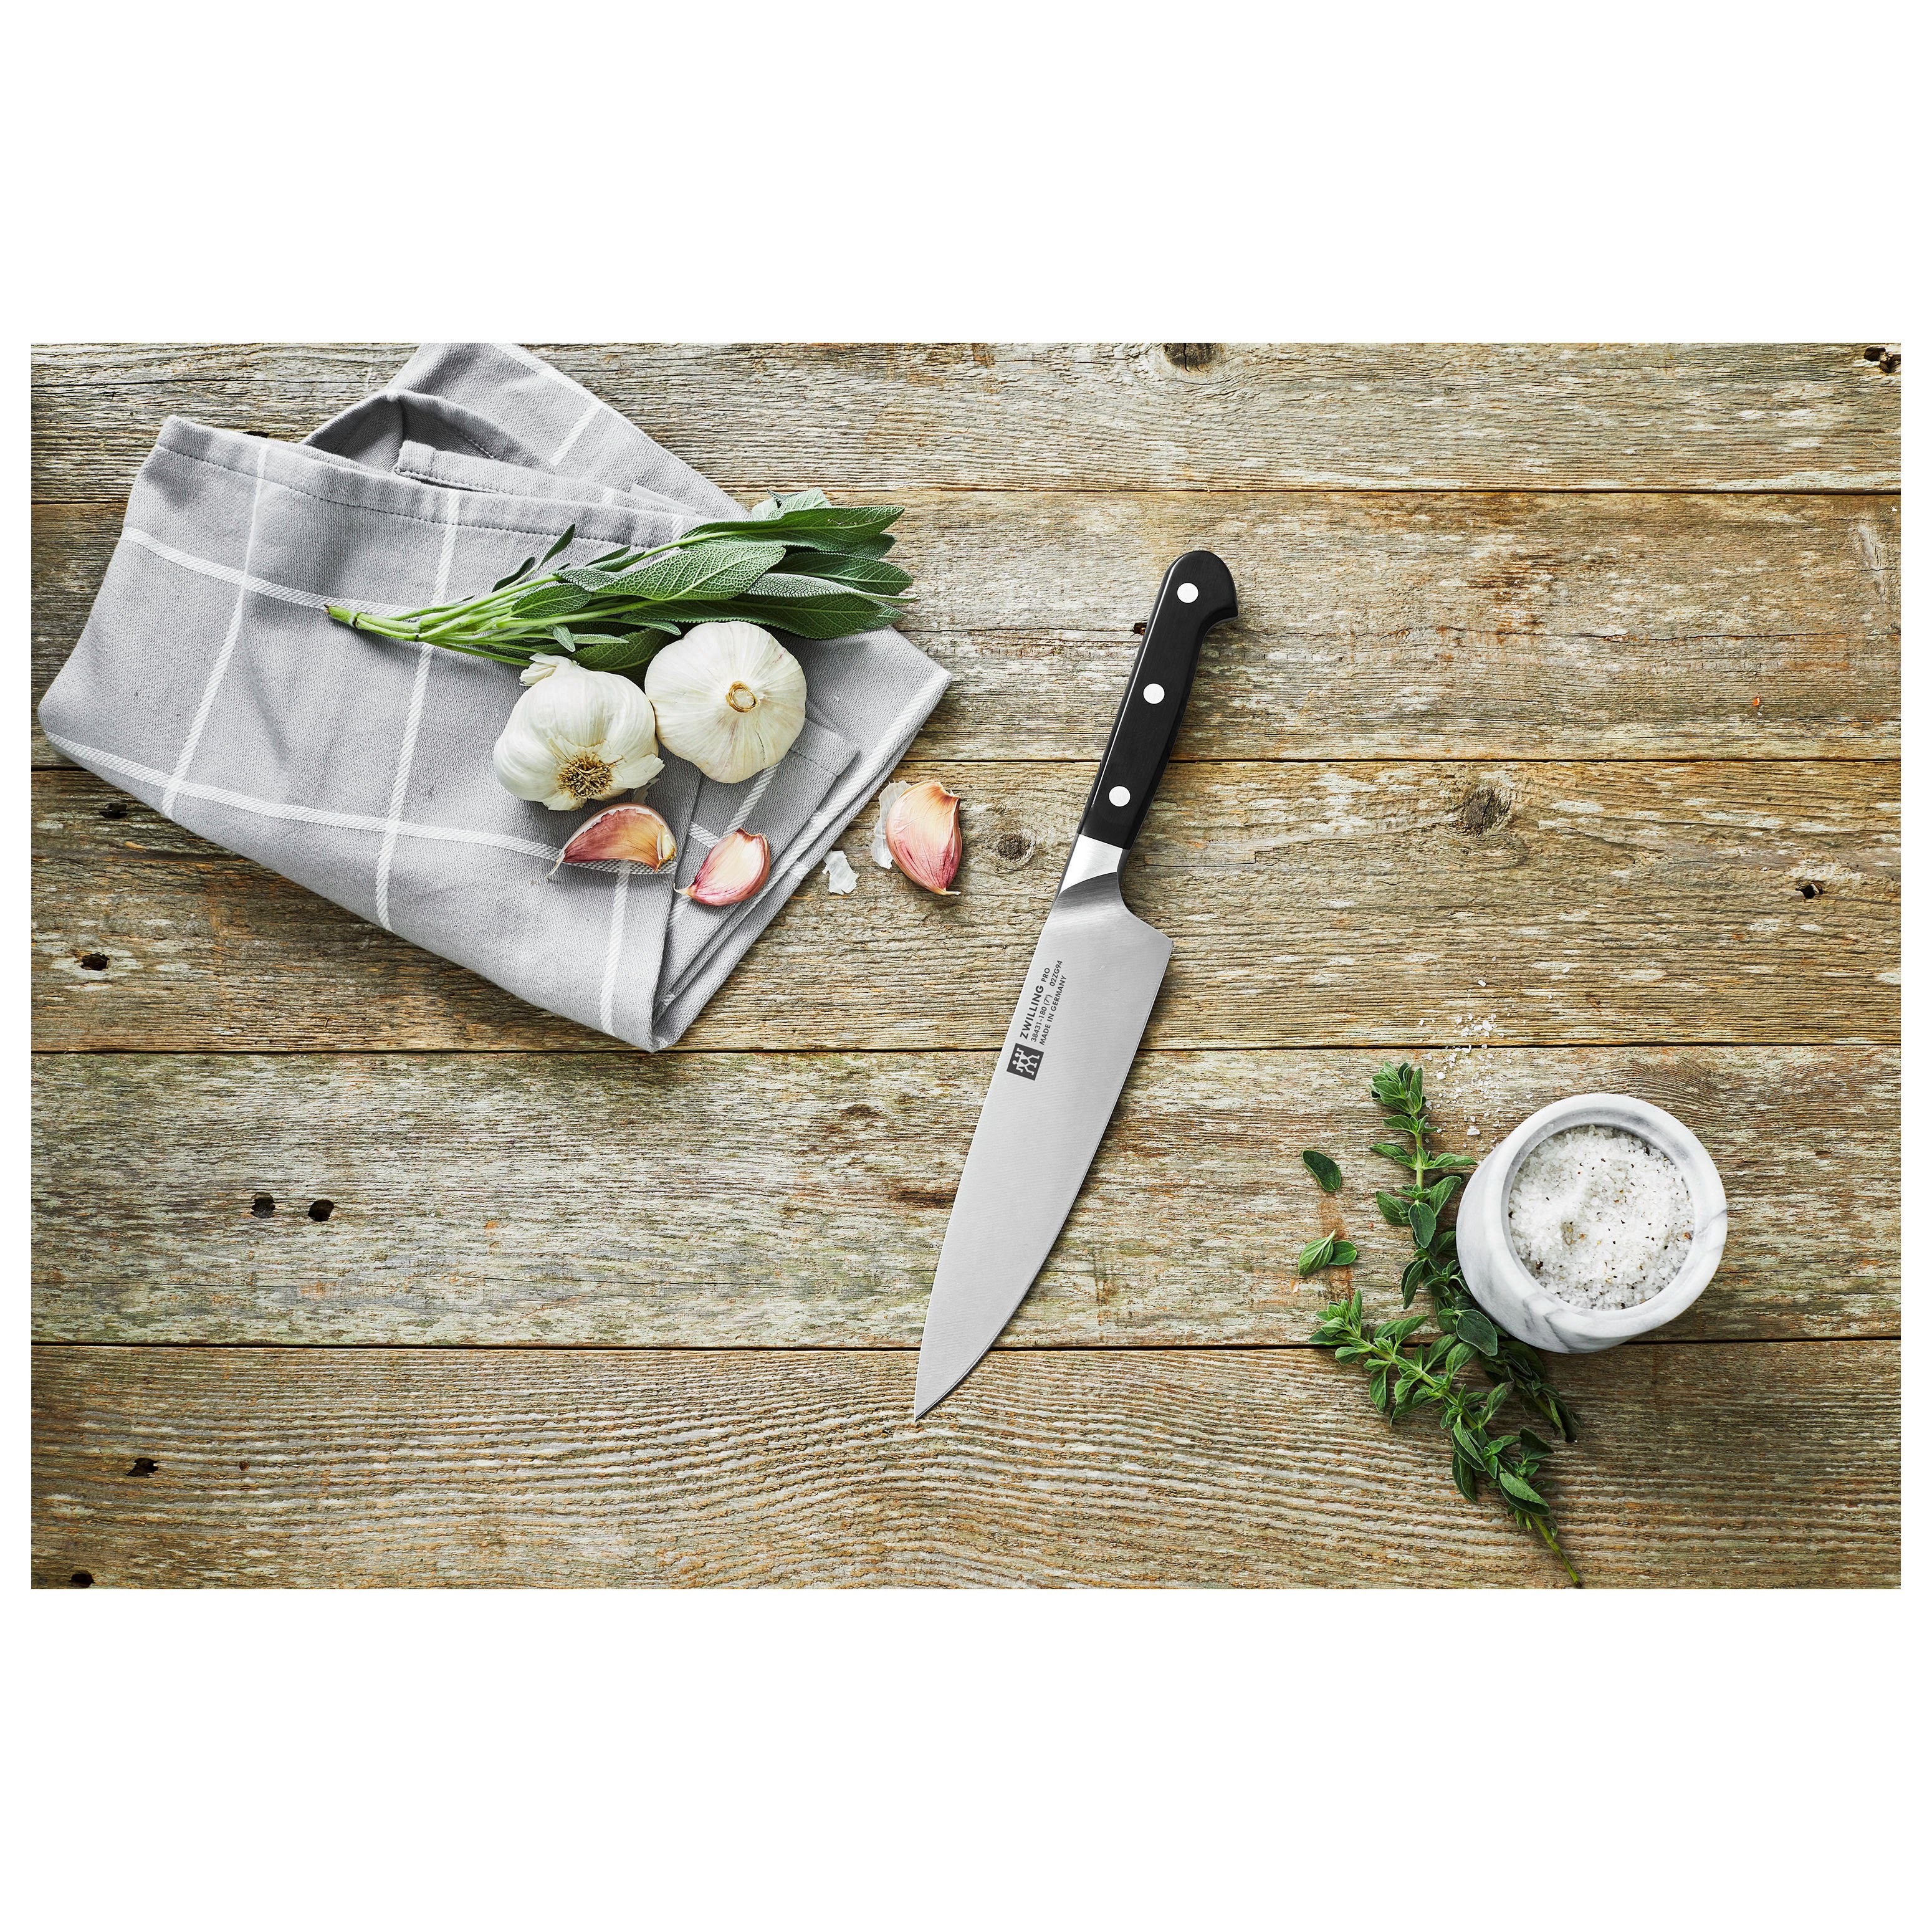 ZWILLING Gourmet 7-inch, chinese chef's knive/vegetable cleaver